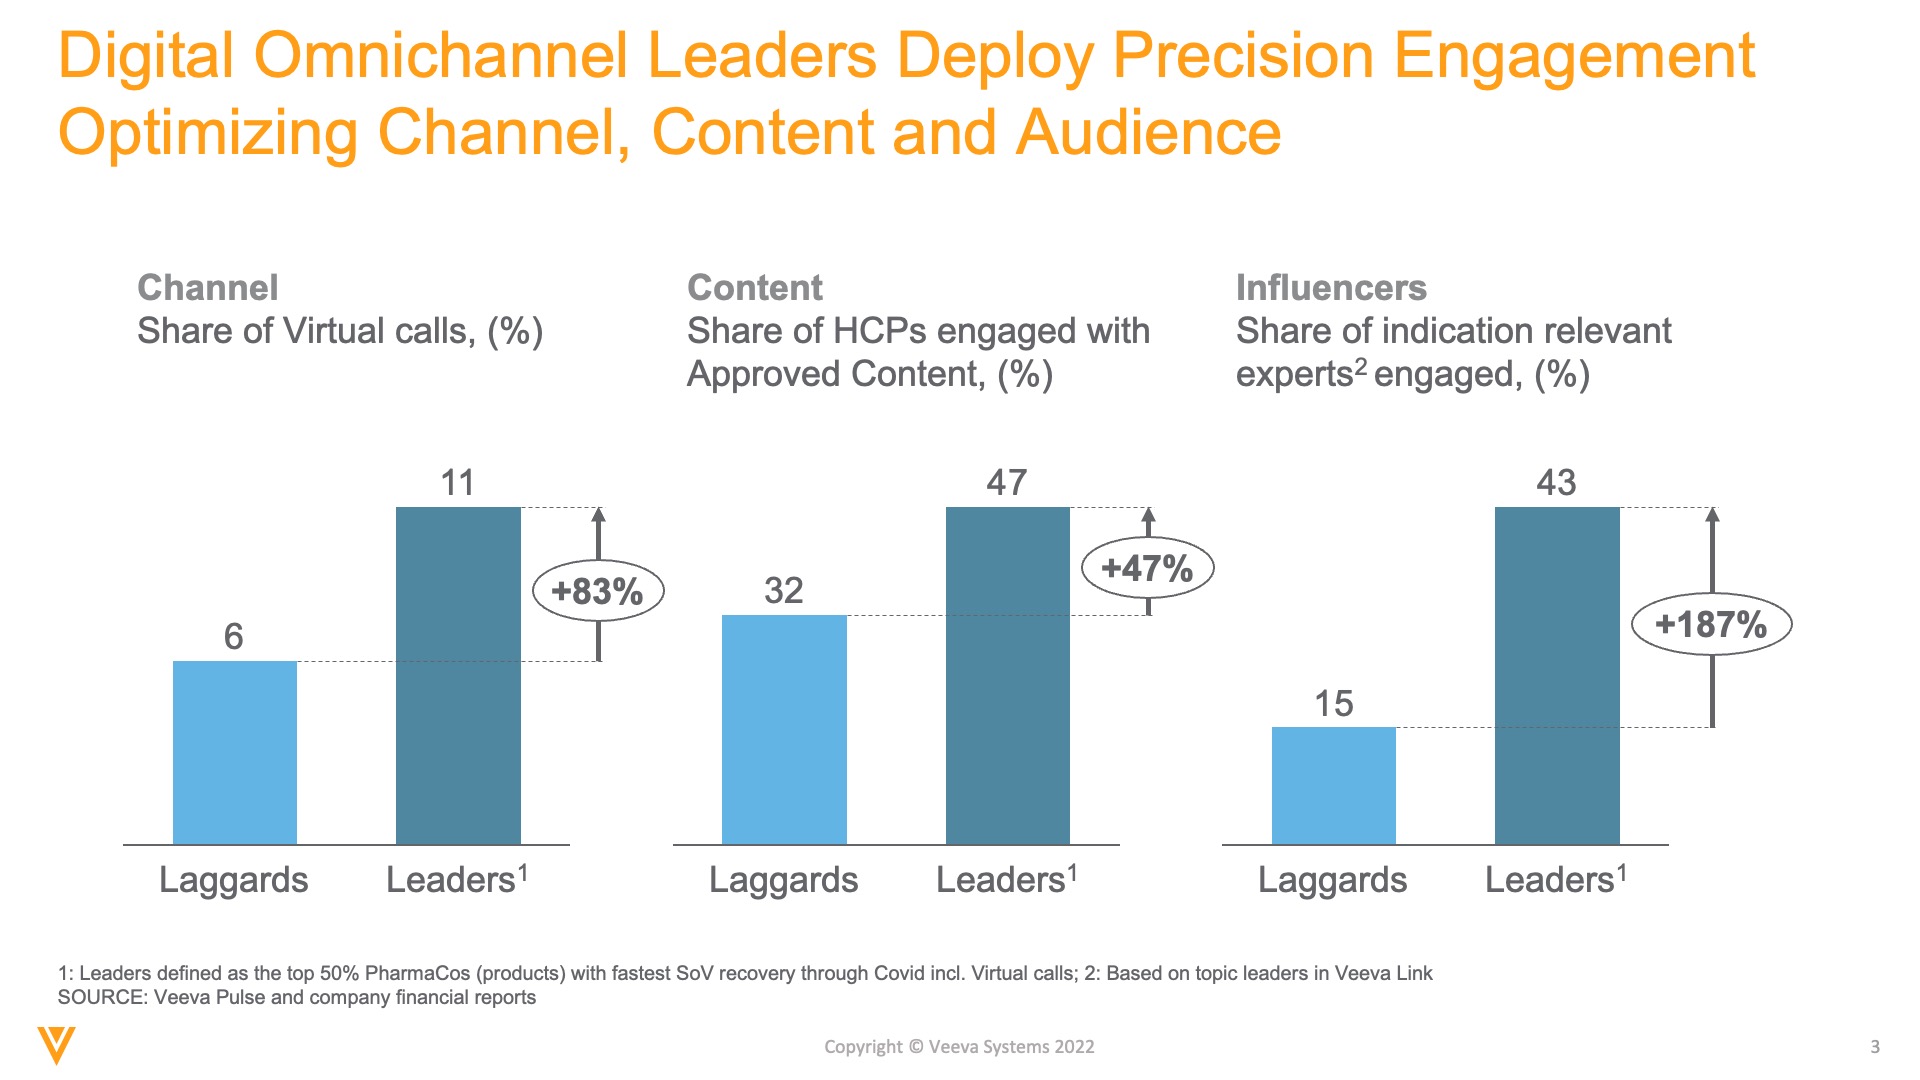 Digital Omnichannel Leaders Deploy Precision Engagement Optimizing Channel, Content and Audience